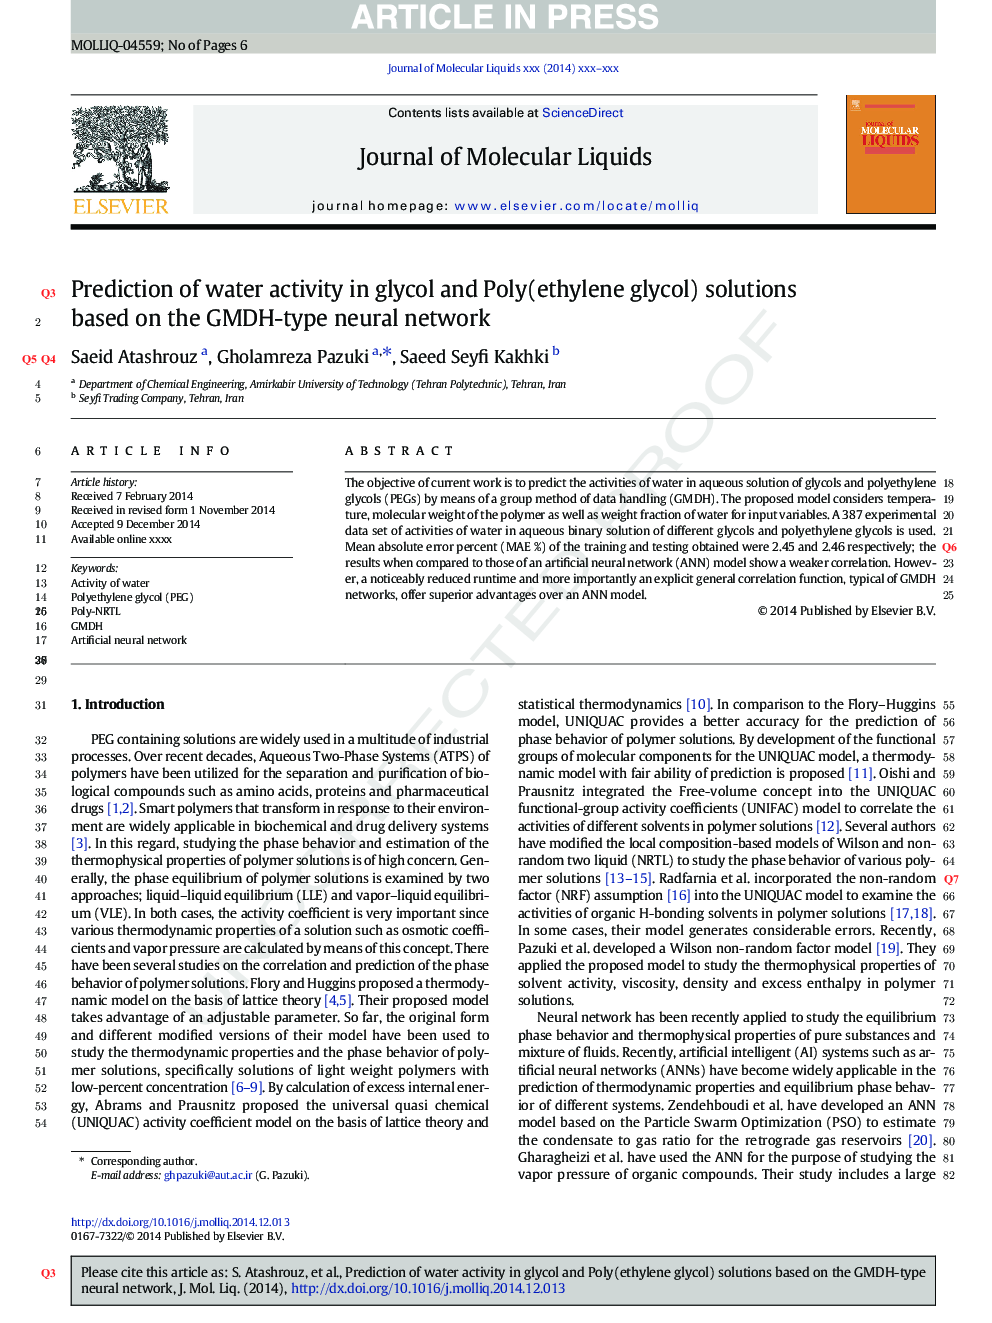 A GMDH-type neural network for prediction of water activity in glycol and Poly(ethylene glycol) solutions